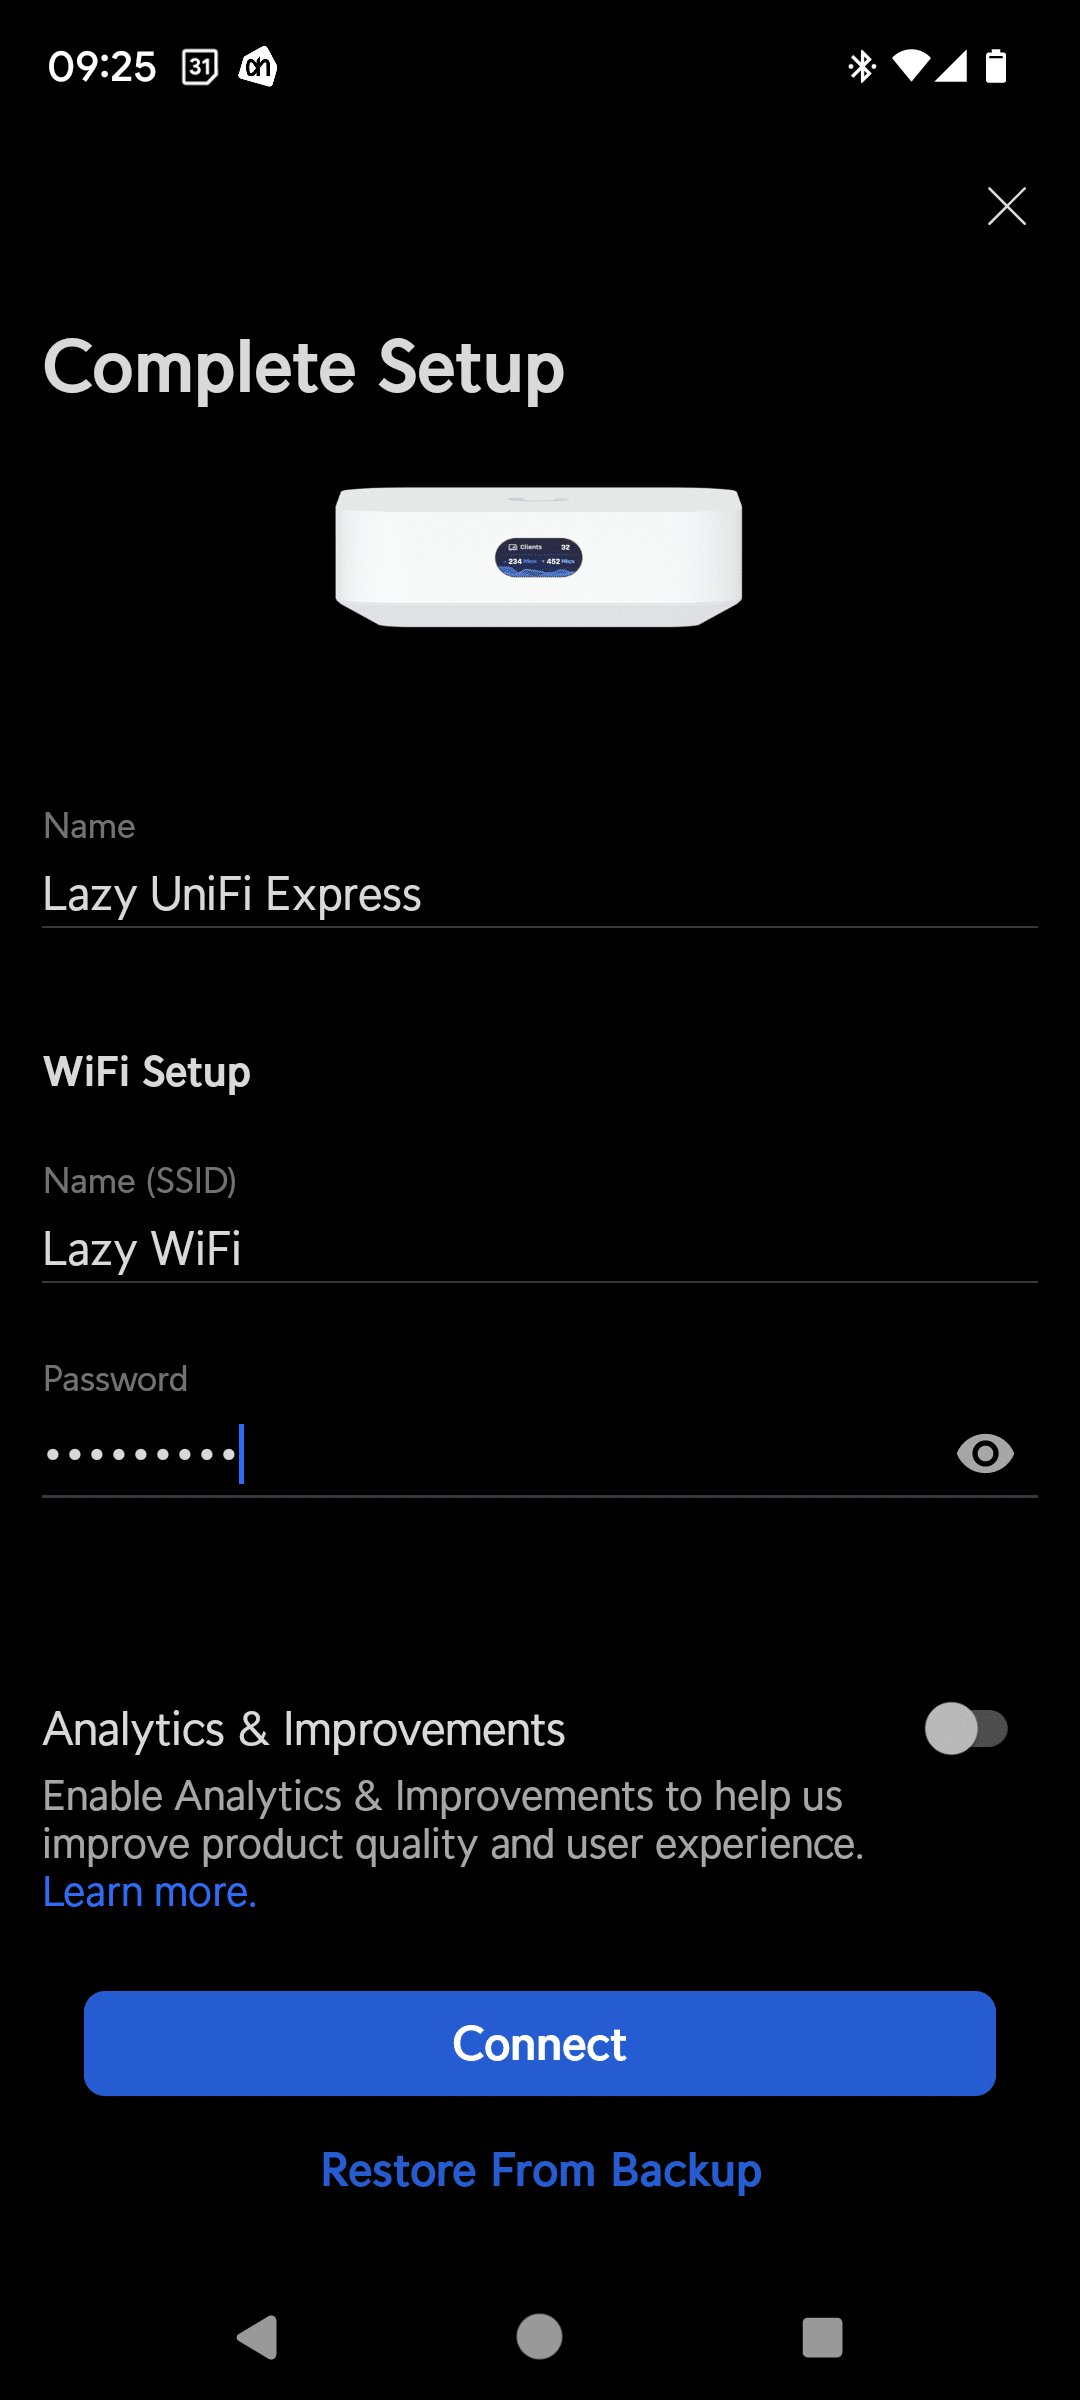 Hi when will you release the unifi express?